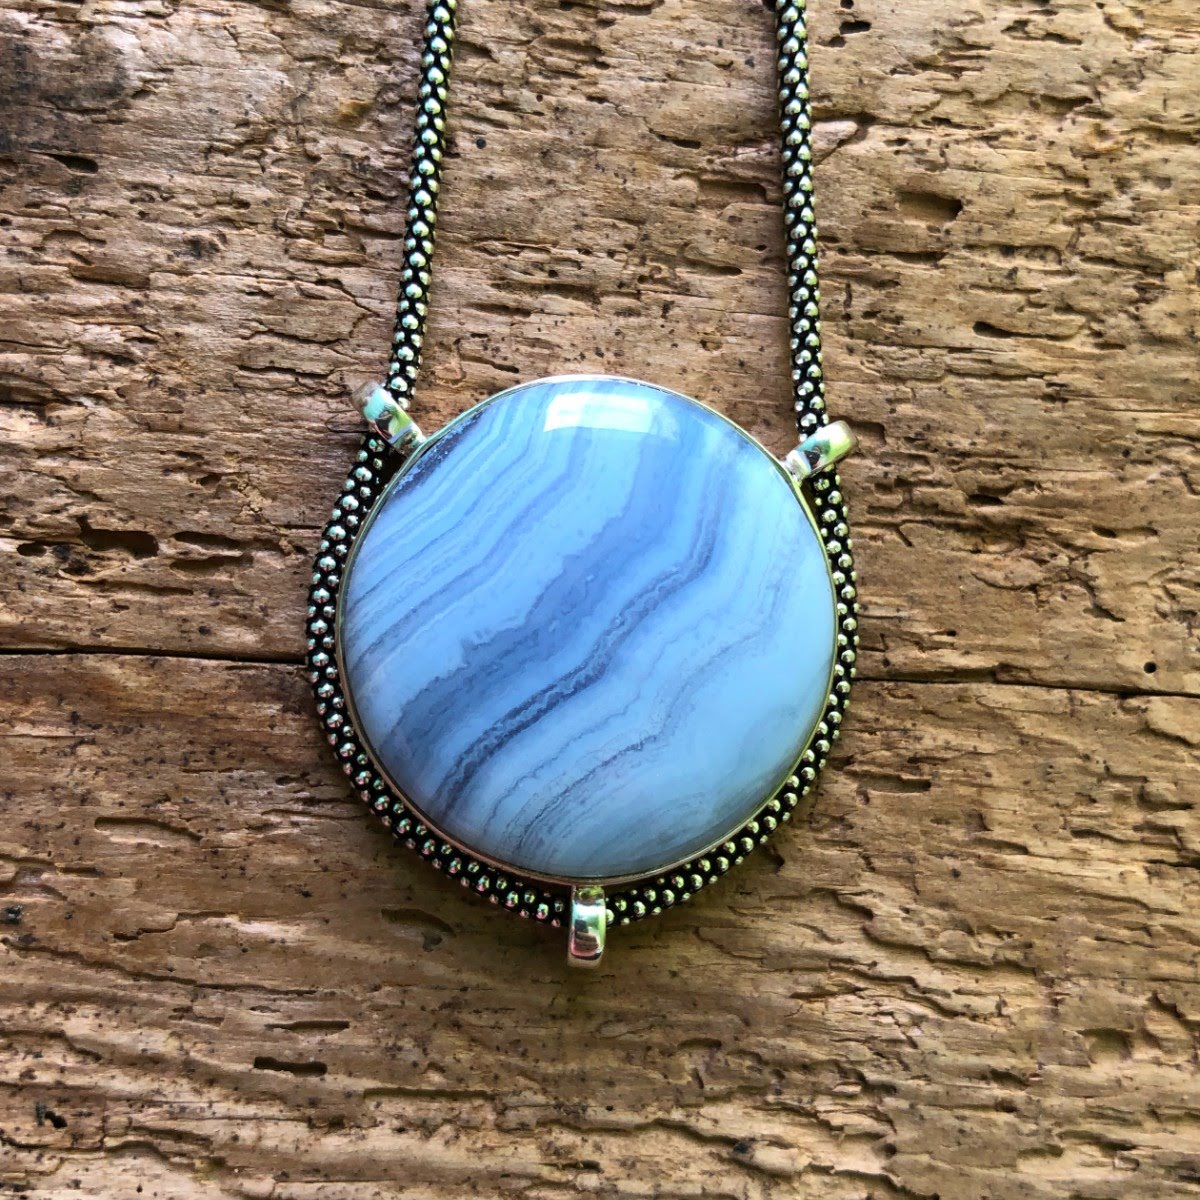 Strikingly good quality circular Blue Lace Agate Pendant with oxidized sterling silver chain on driftwood background